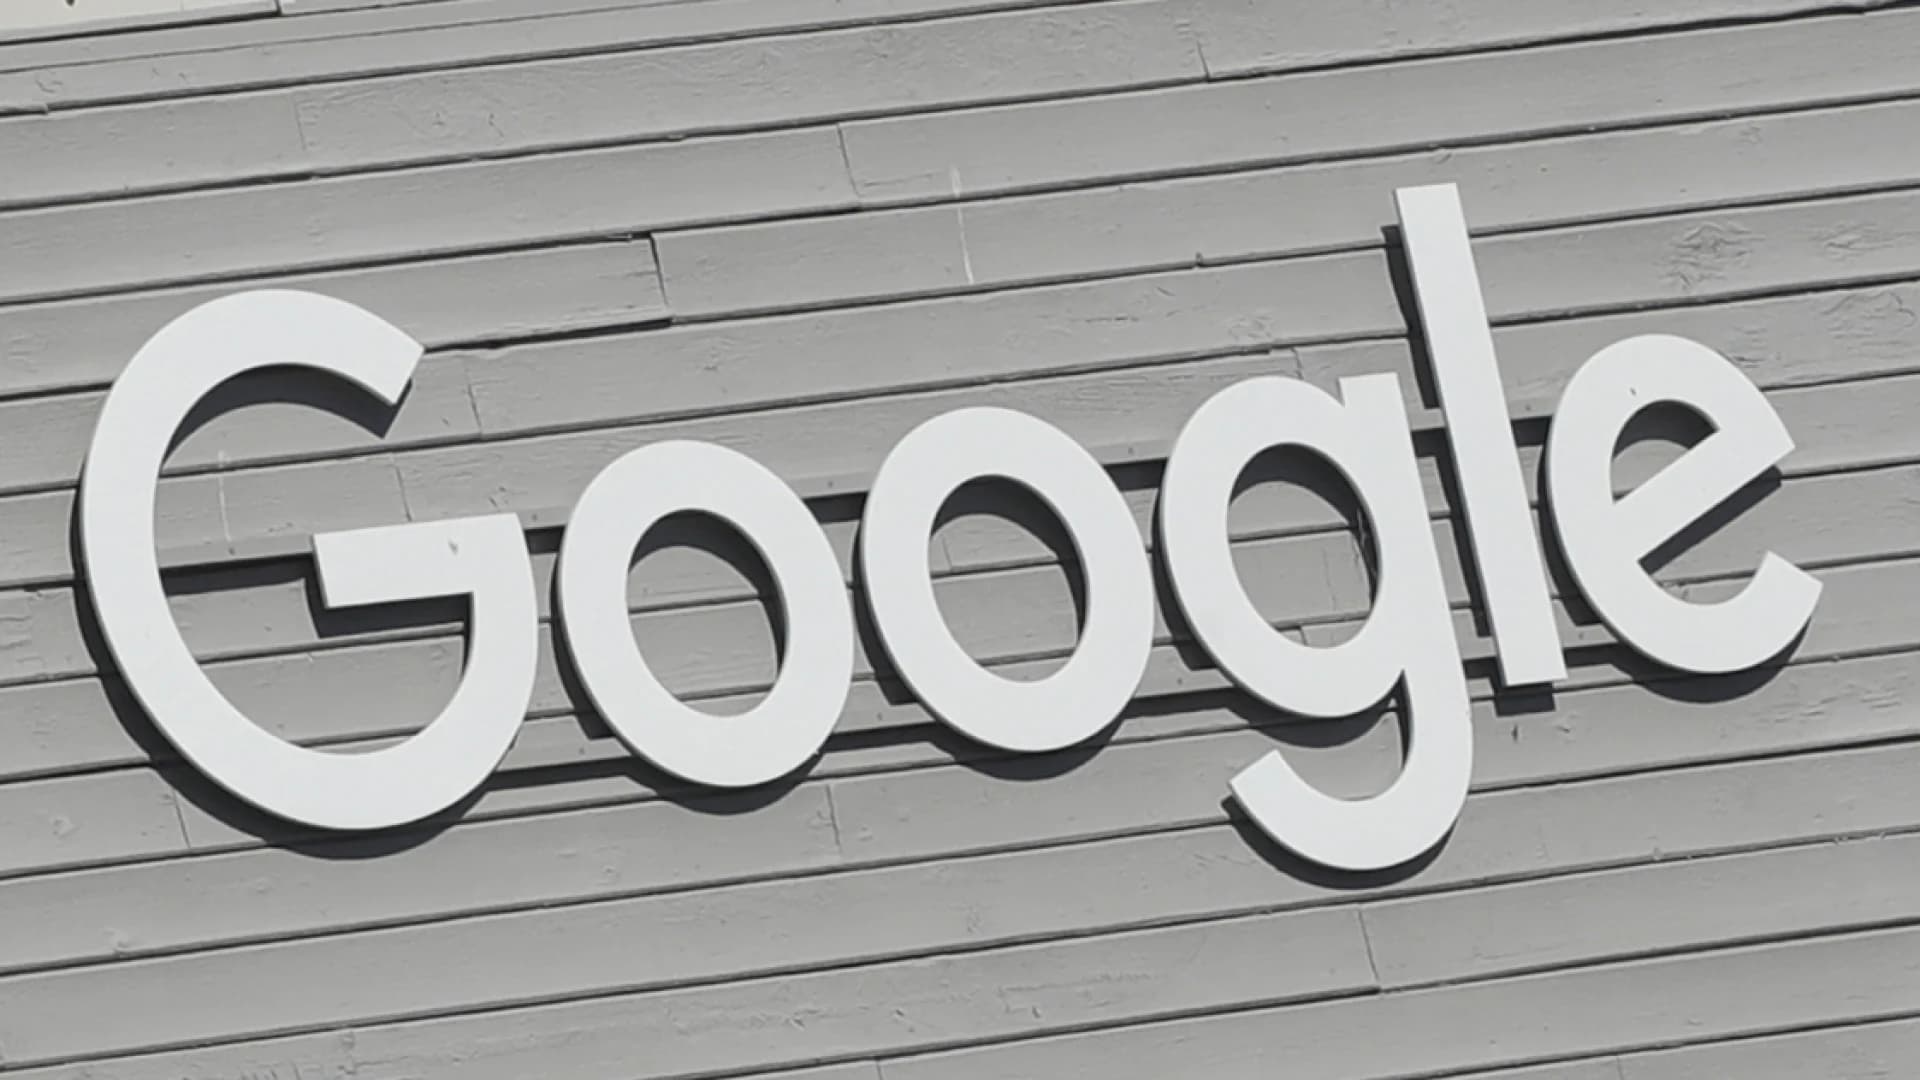 Beefing up its cybersecurity, Google buys Mandiant for $5.4B